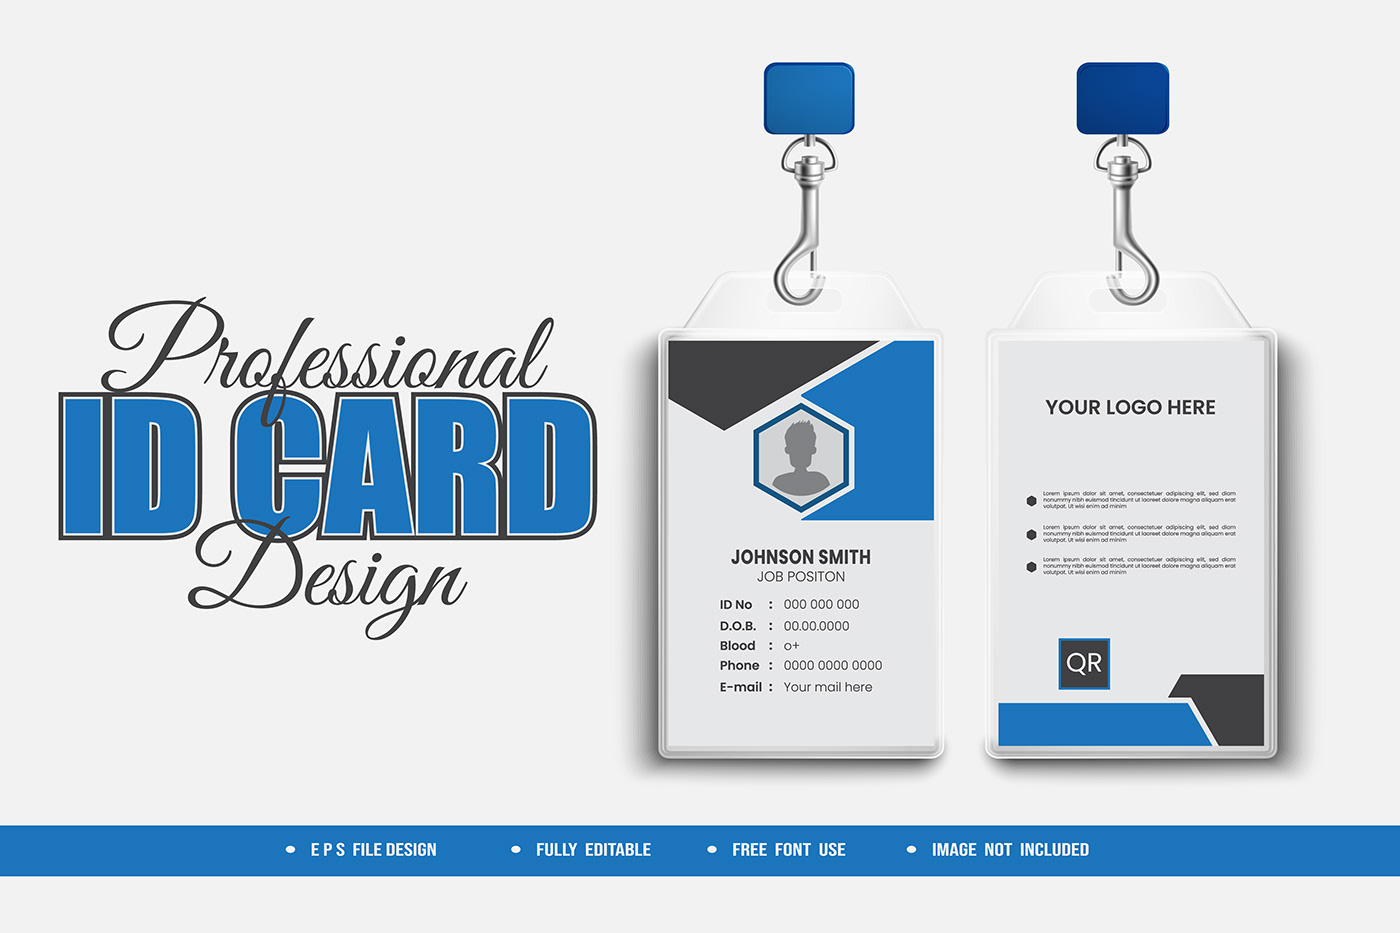 Logo Design branding kit brand style guide Corporate Identity Name card ID badge identity card business card design visiting card